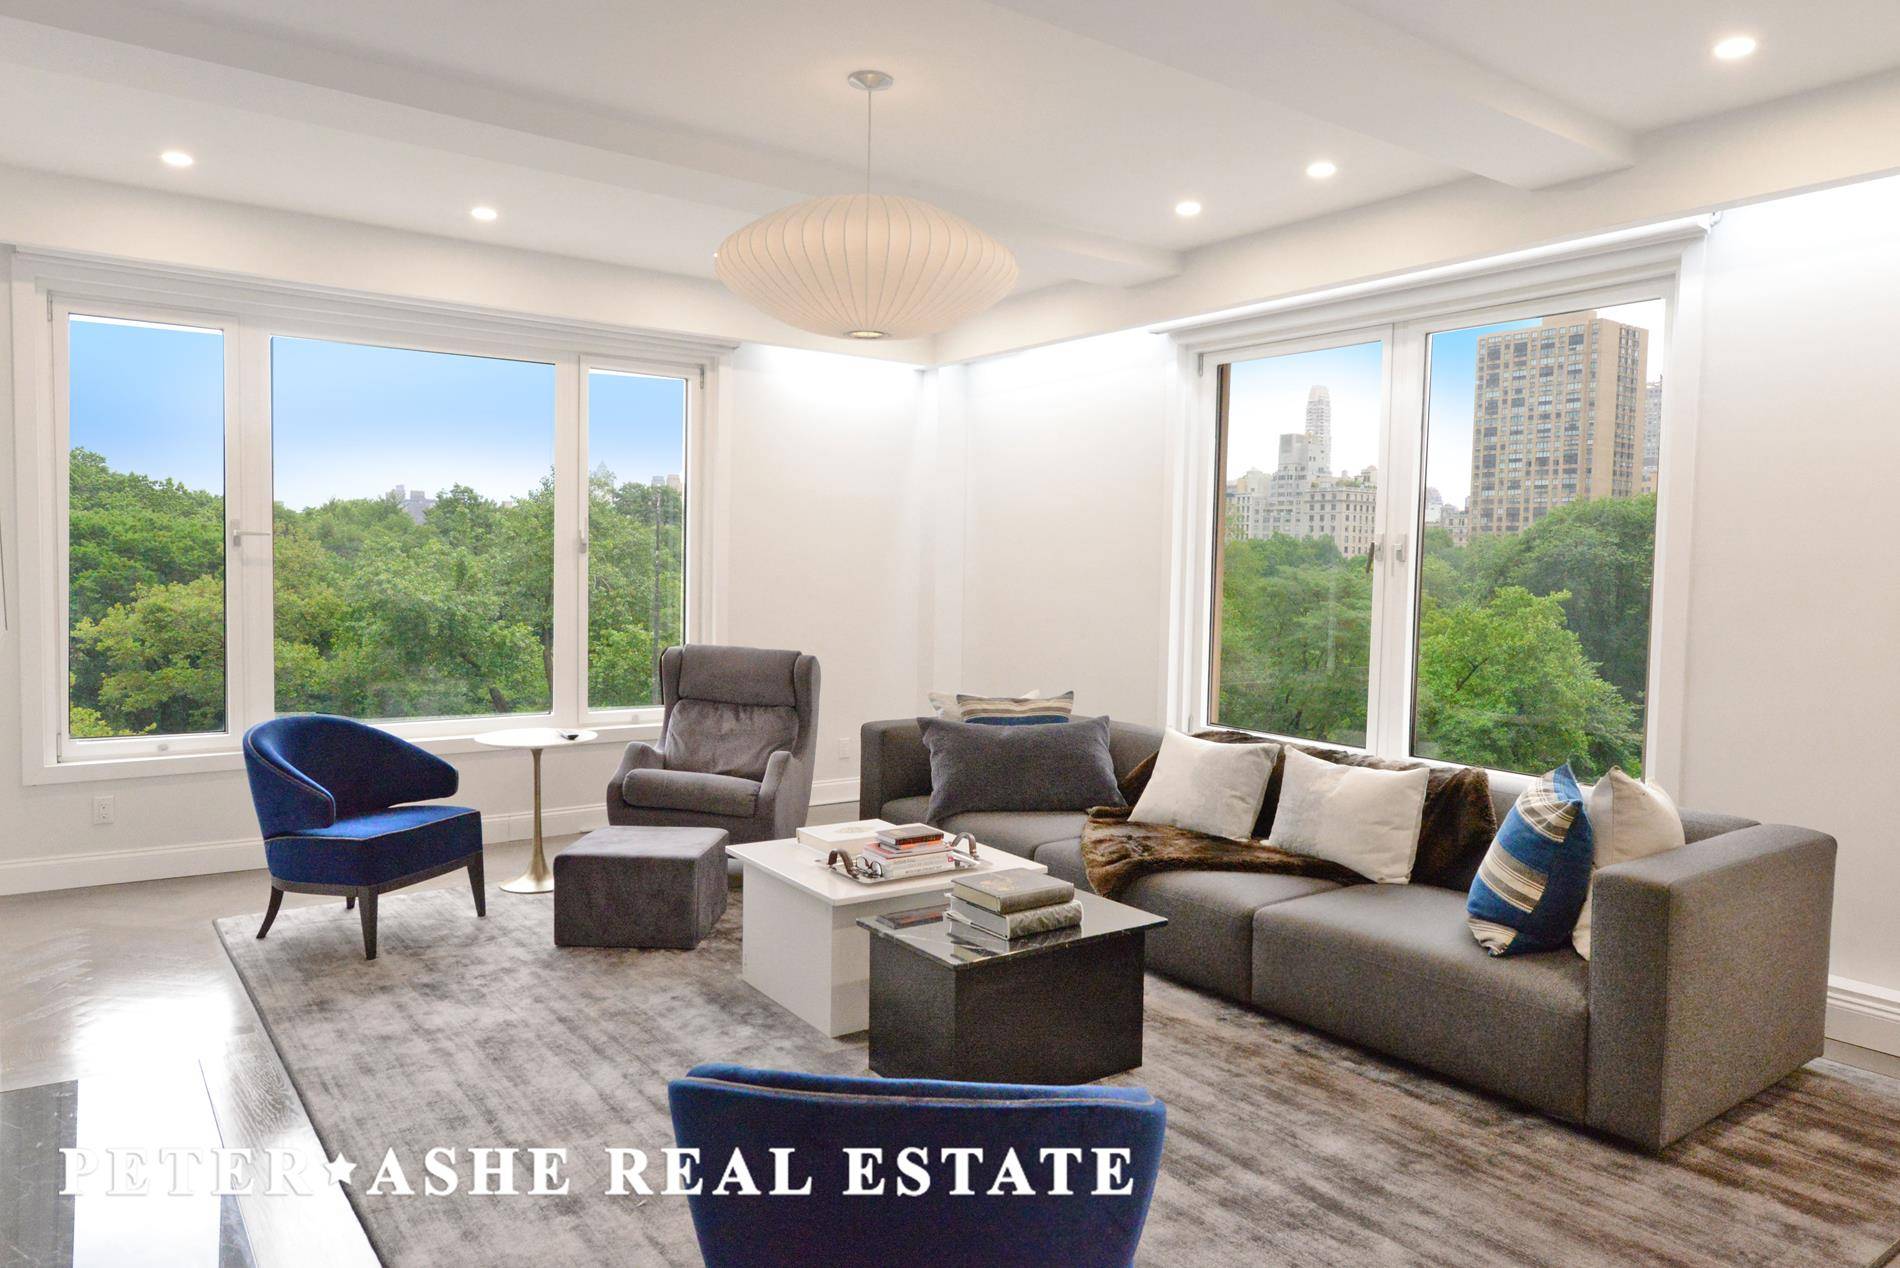 Oversized windows combine to offer postcard worthy views of Central Park from every single room in this tastefully renovated home.